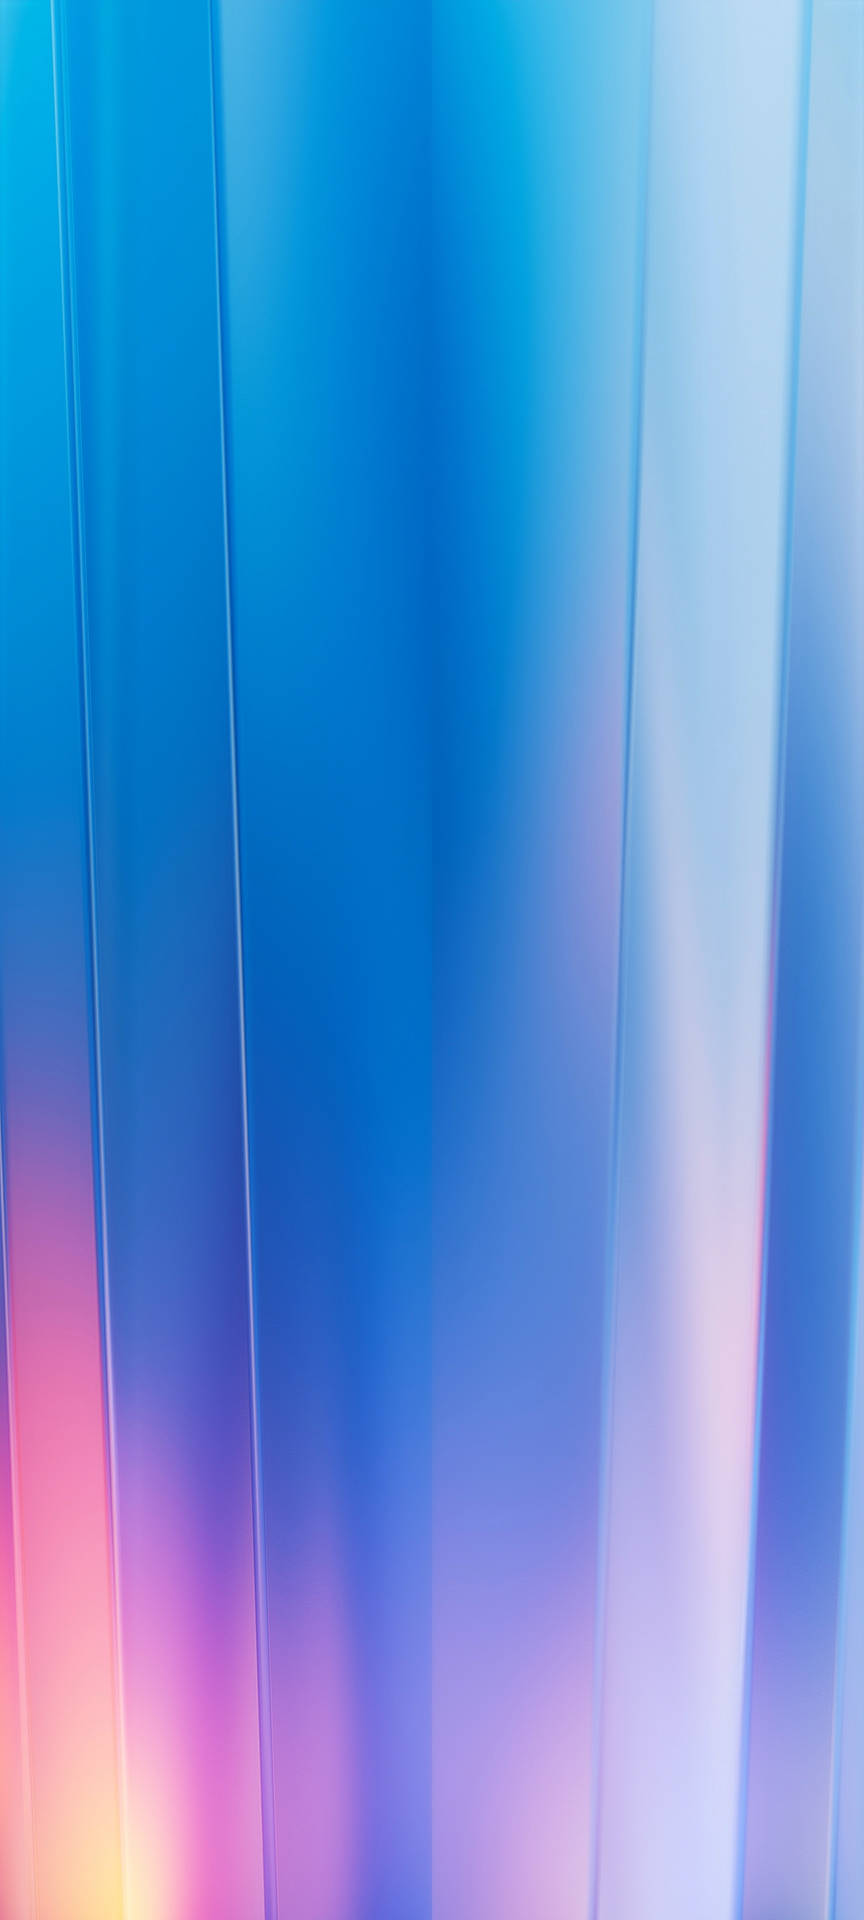 A Blue And Purple Abstract Background Wallpaper